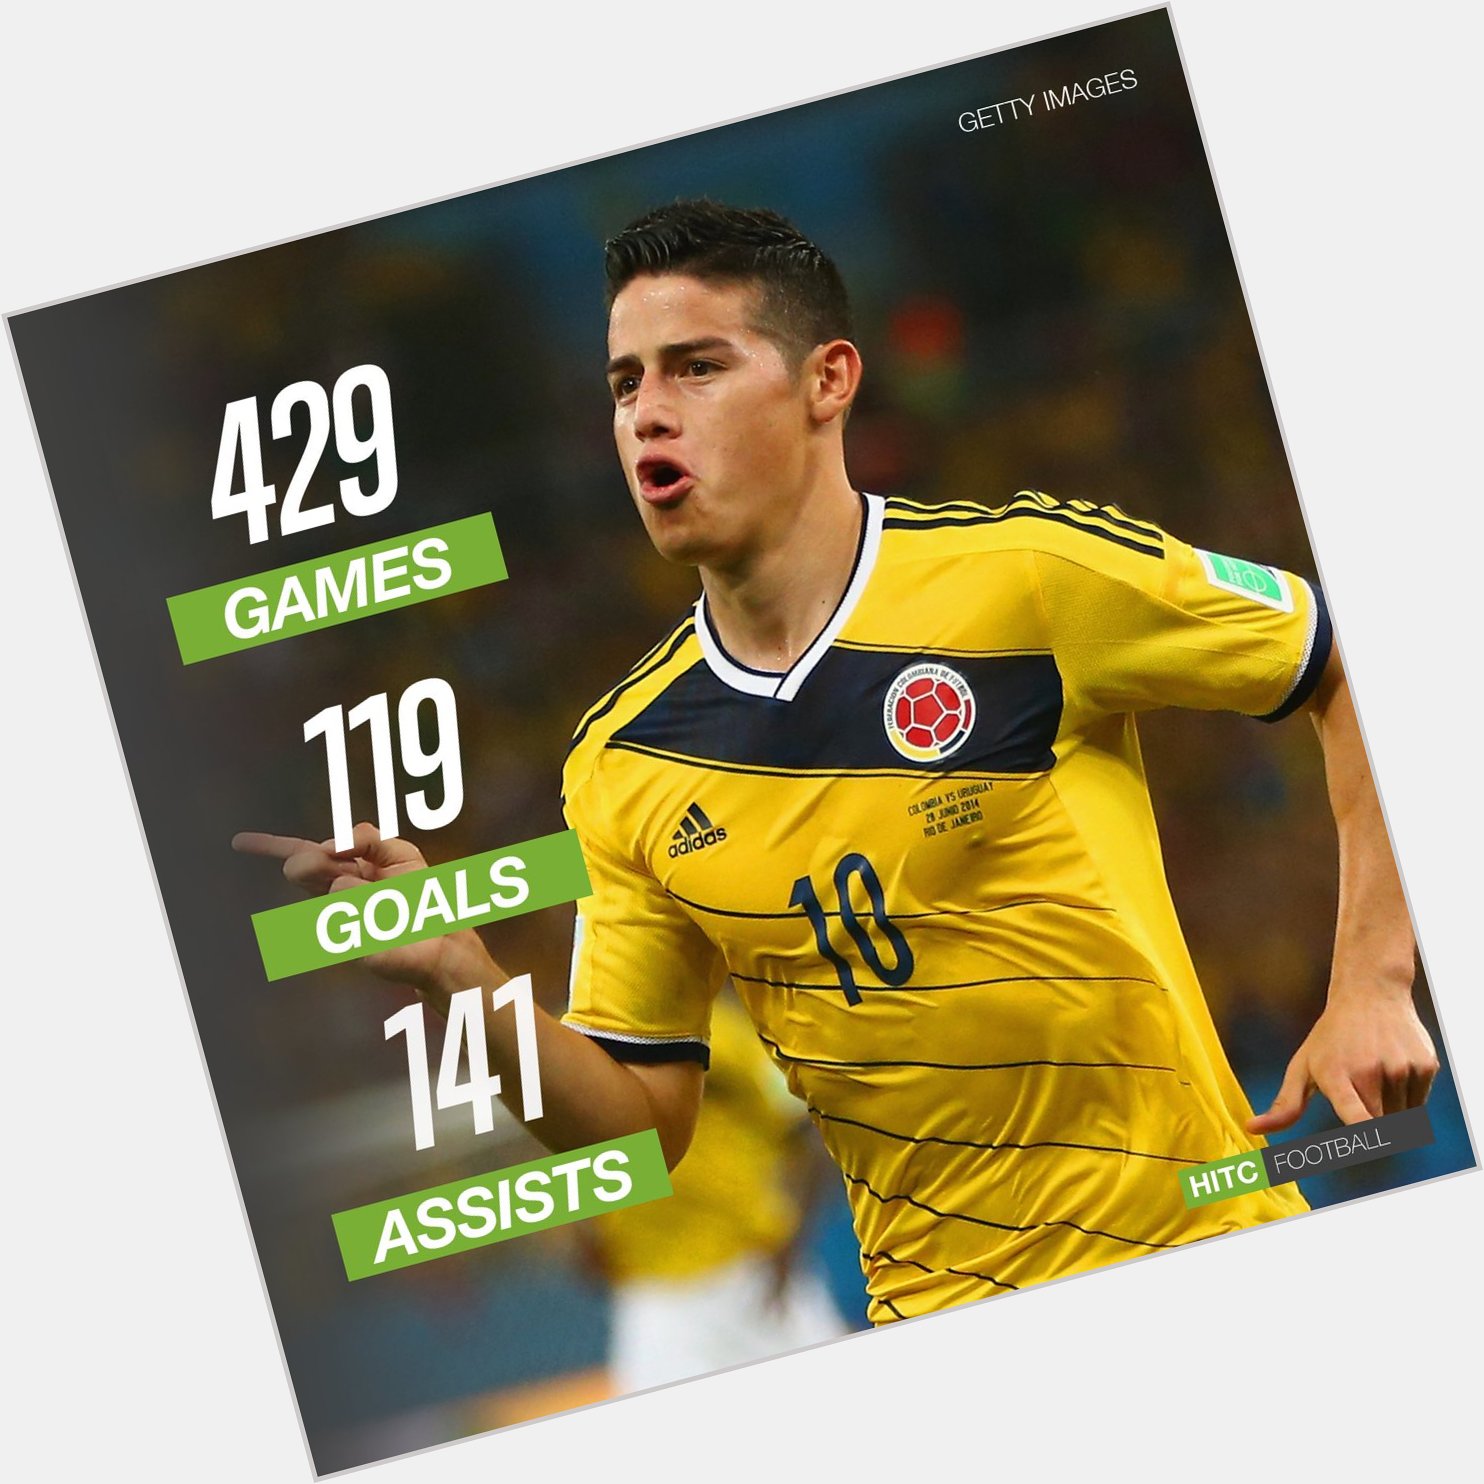   Happy Birthday James Rodriguez!

Time to go back and watch the 2014 Puskas Award winner again 